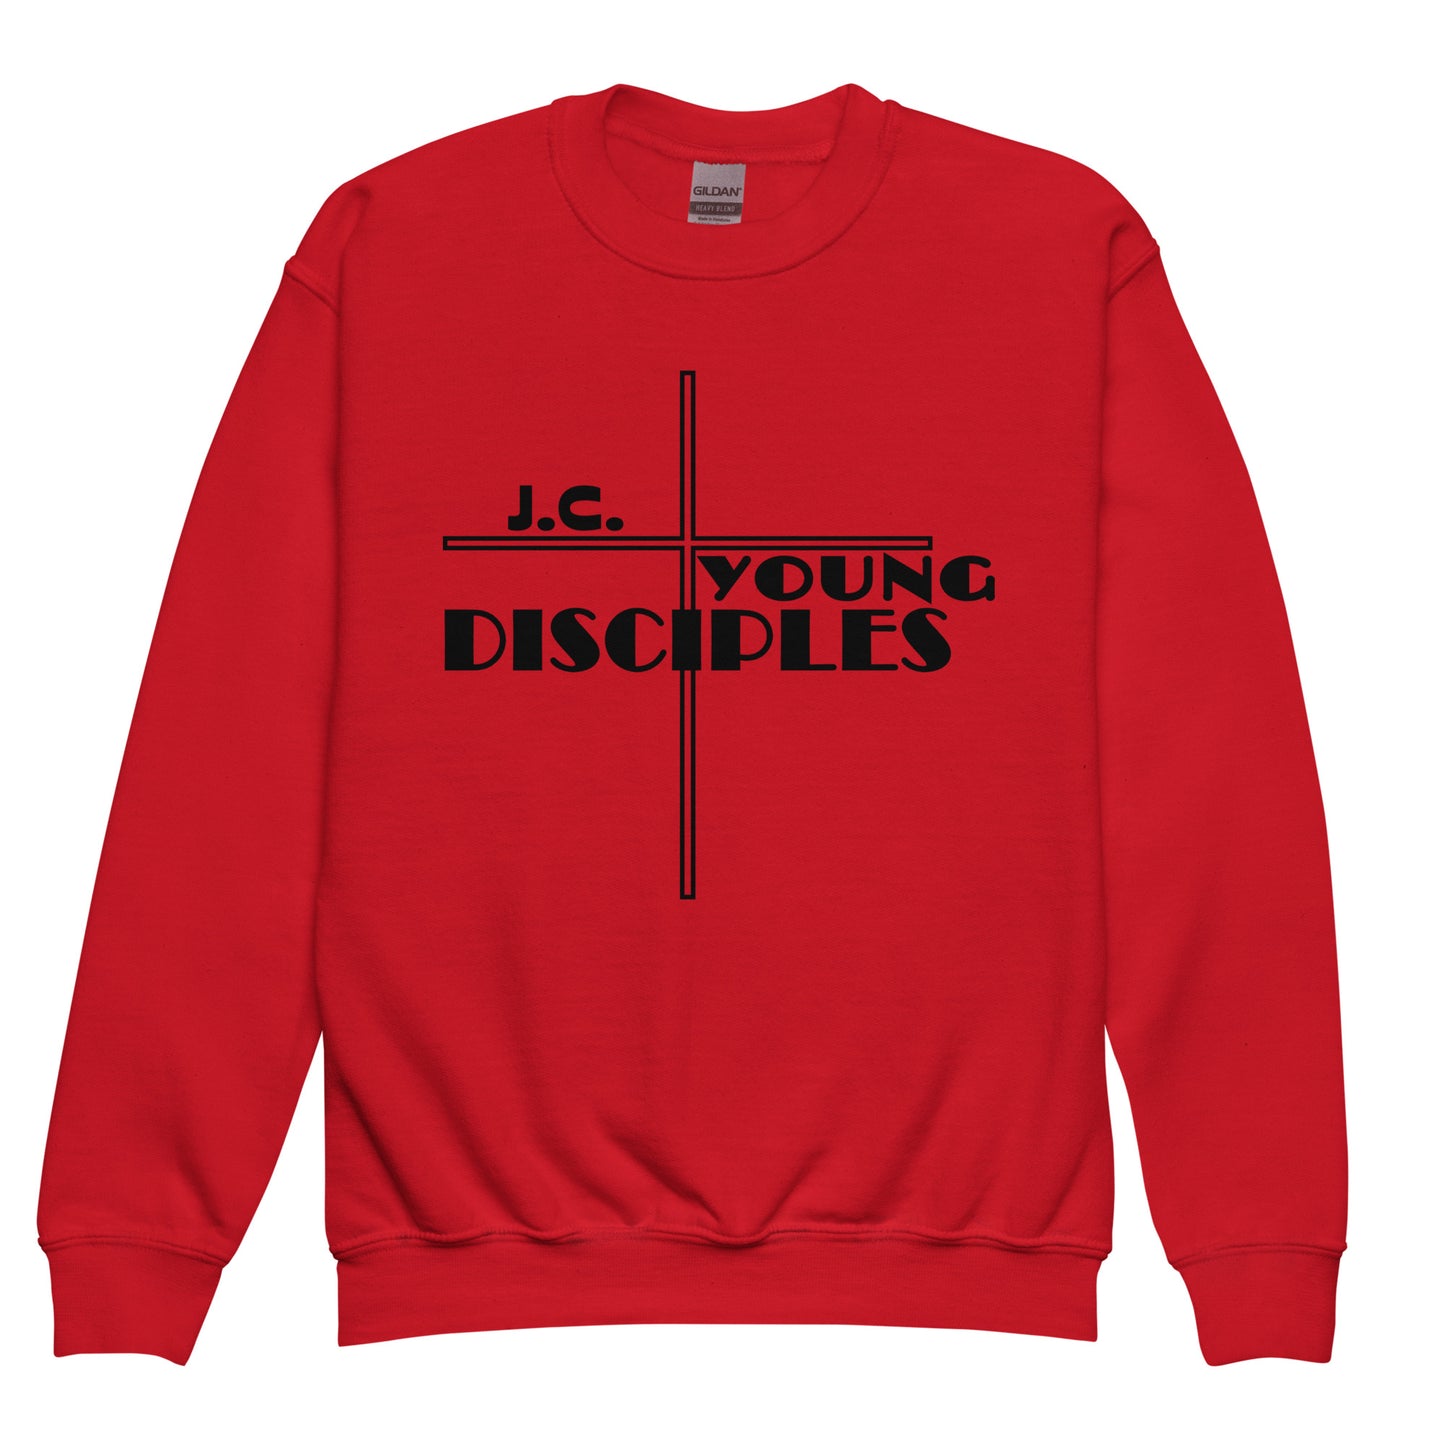 J.C. Young Disciples Youth Sweatshirt